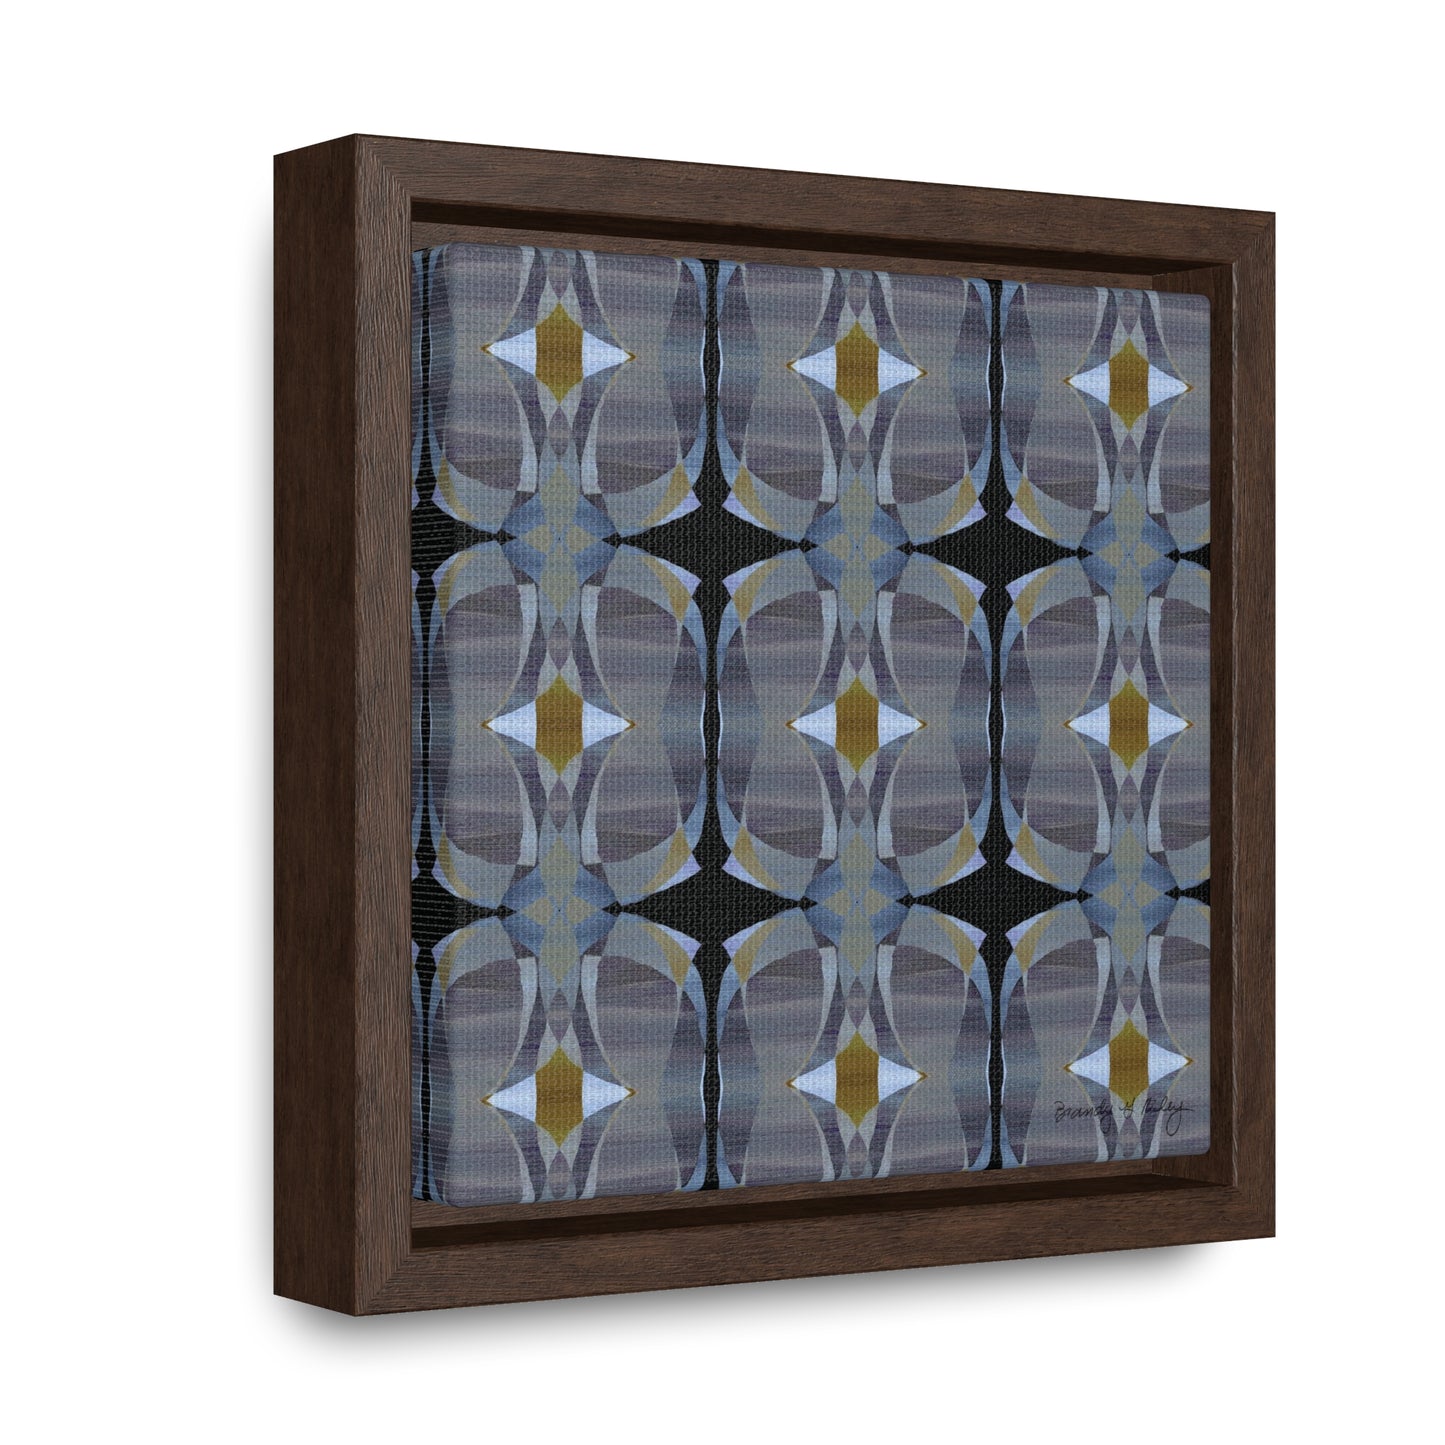 Mini stretch canvas featuring an abstract gray pattern in a brown fraome